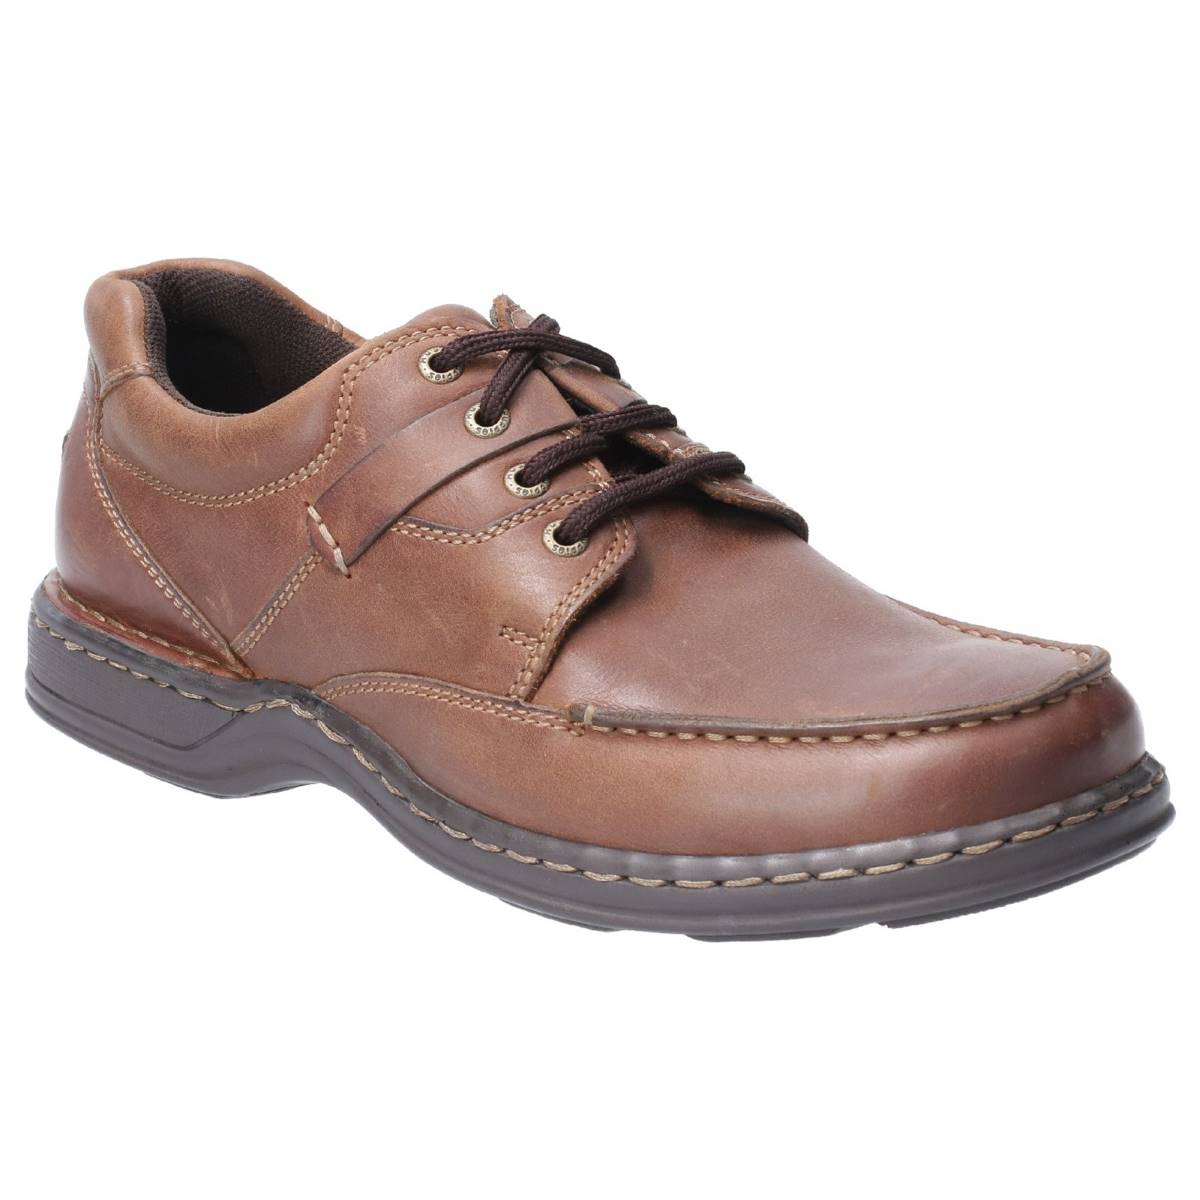 Hush Puppies Randall Ii Brown Mens comfort shoes HPM2000-62-2 in a Plain Leather in Size 11